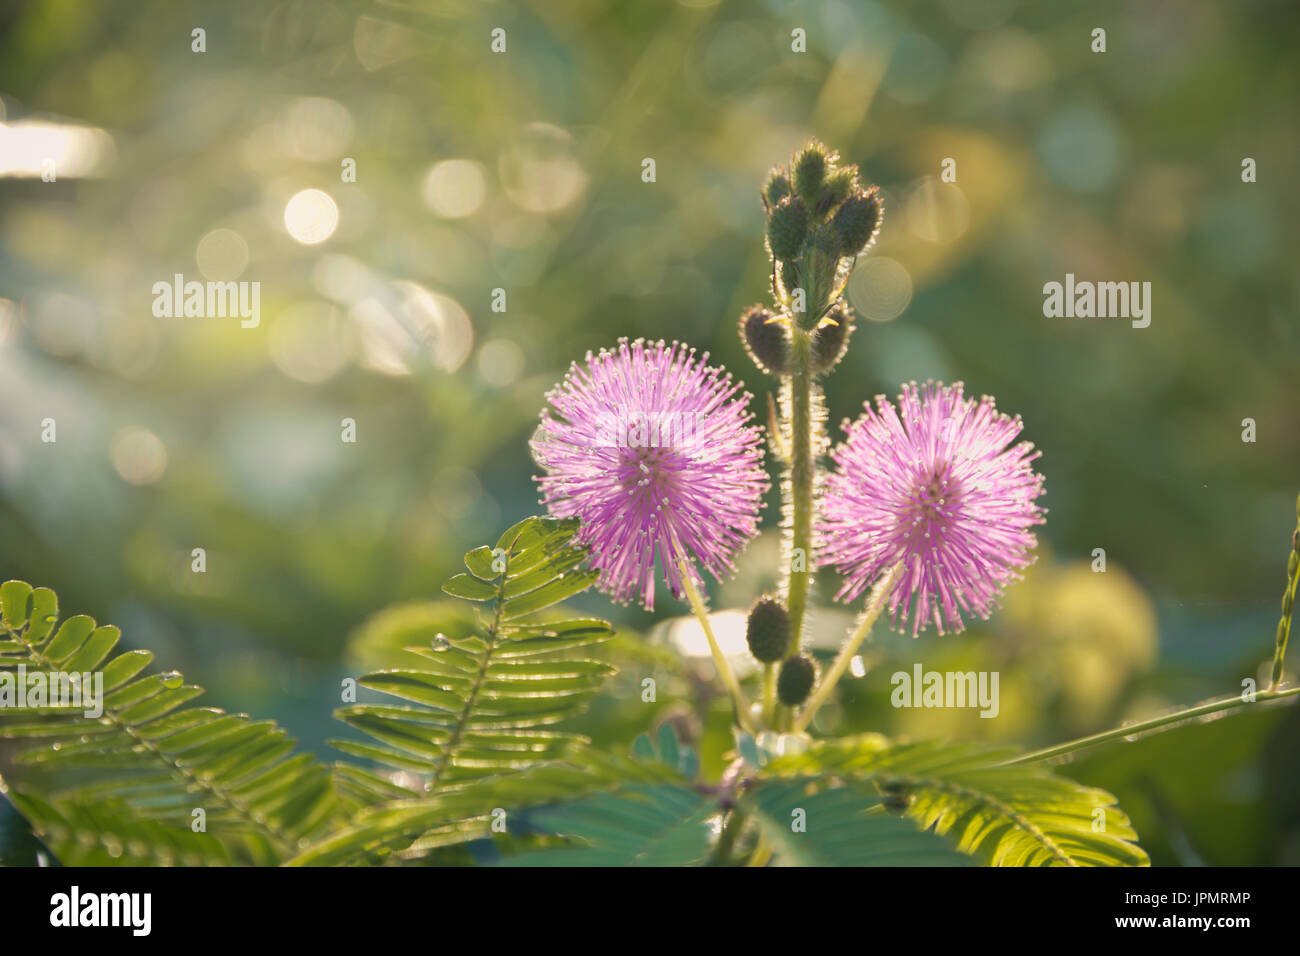 Closeup photo of a thistle wildflower in the field in thailand Stock Photo